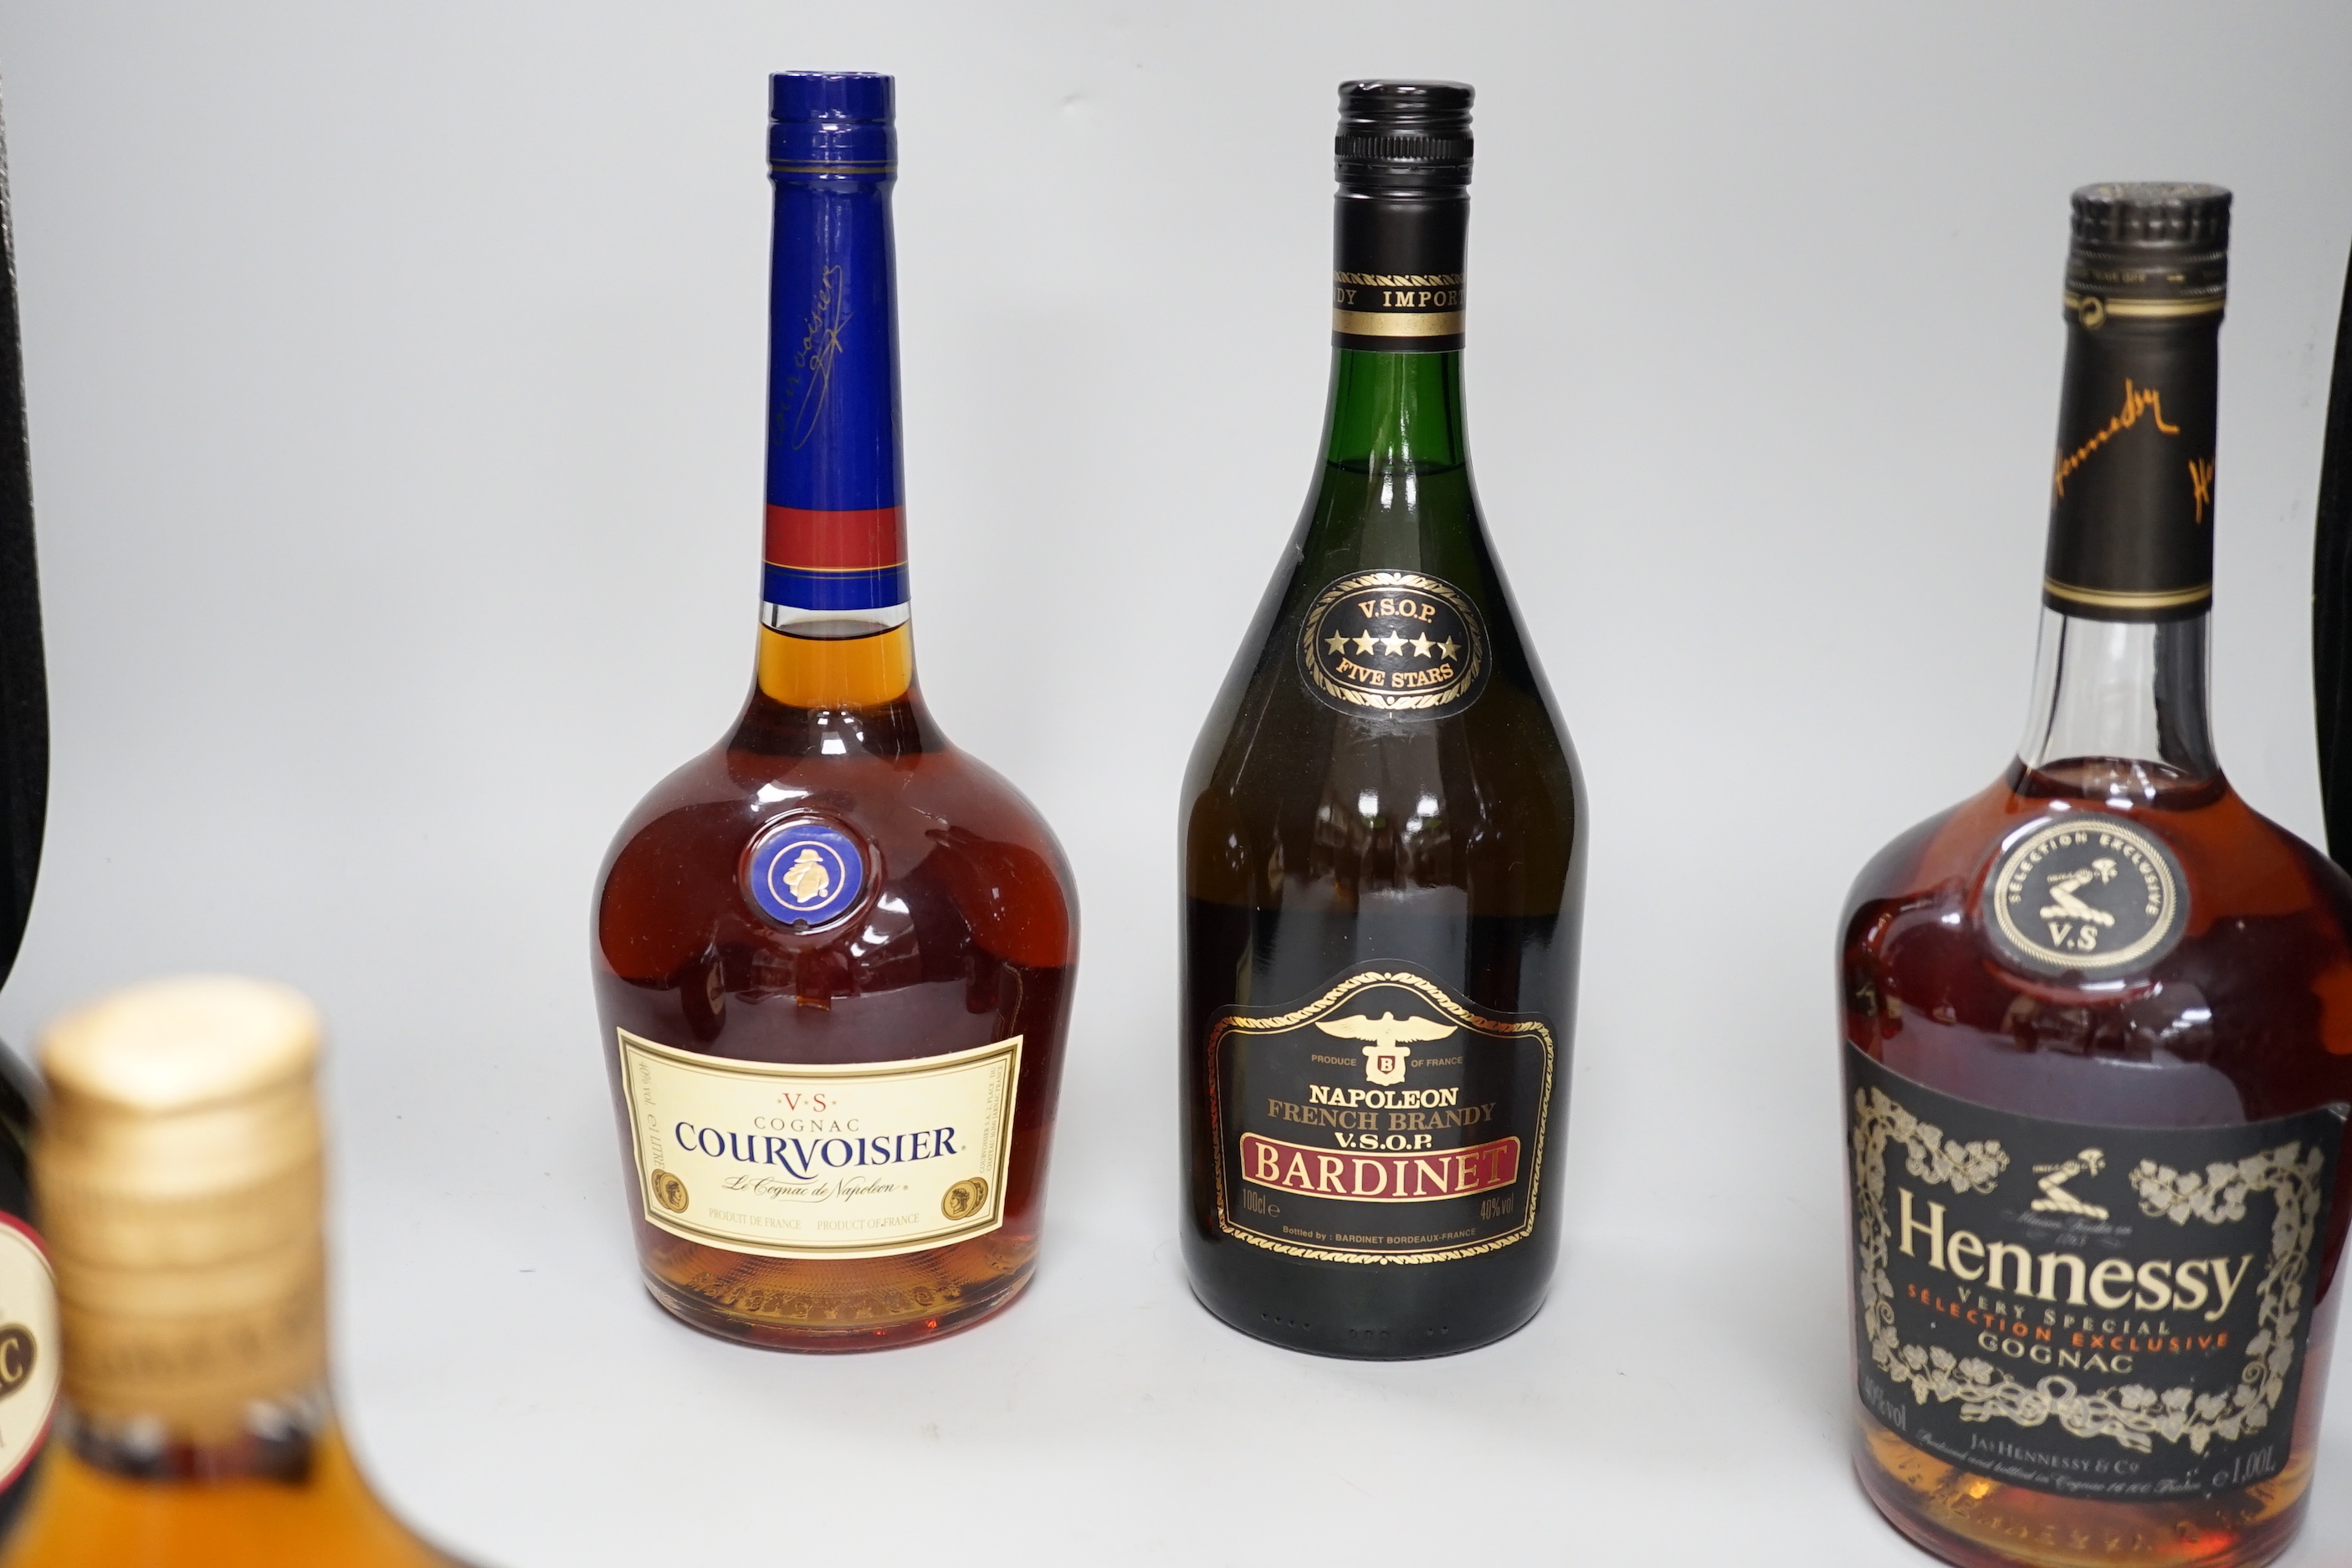 Five bottles of cognac, Armagnac and brandy - 1 litre of Hennessy very special selection exclusive cognac, 1 litre of VS Courvoisier cognac, 1 litre of VSOP Bardinet napoleon brandy, a 70cl bottle of Marquis de Senac Arm